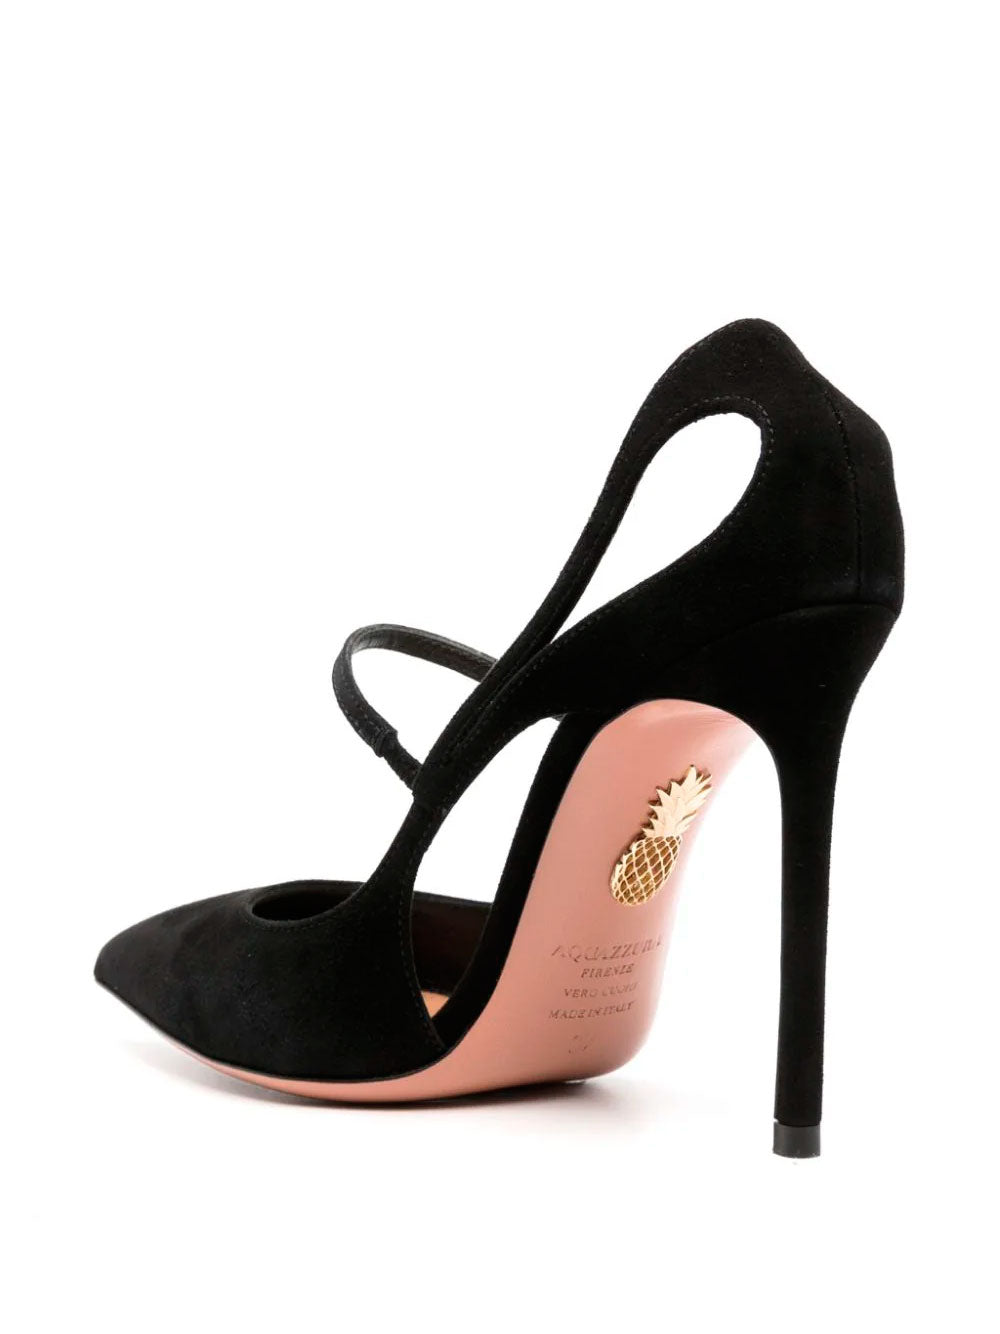 Bovary pumps